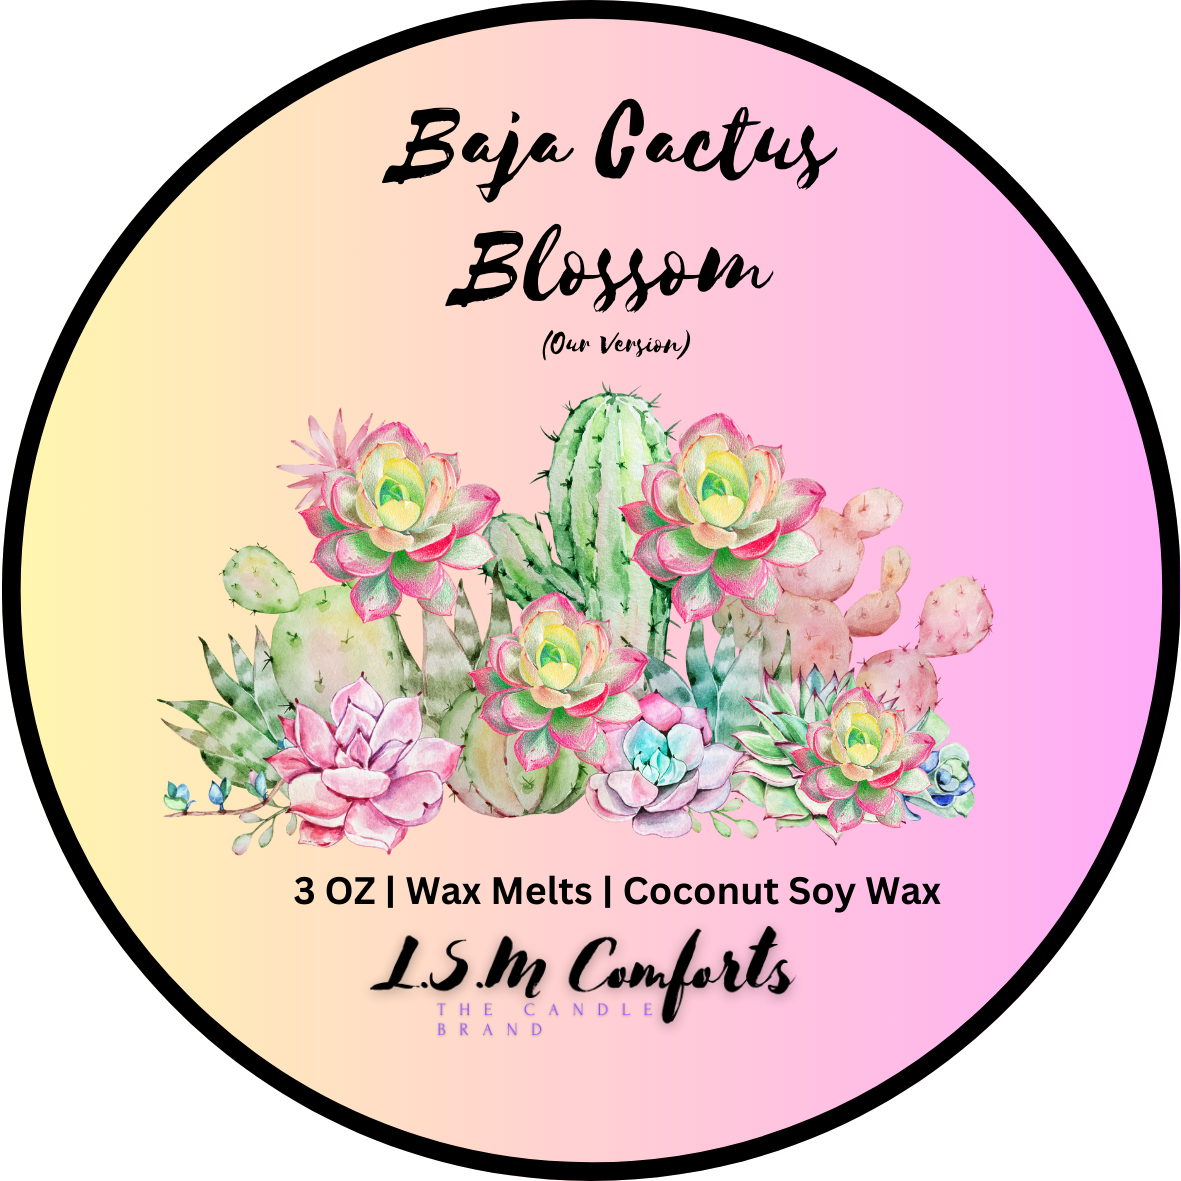 Baja Cactus Blossom (Our Version) Wax Melts